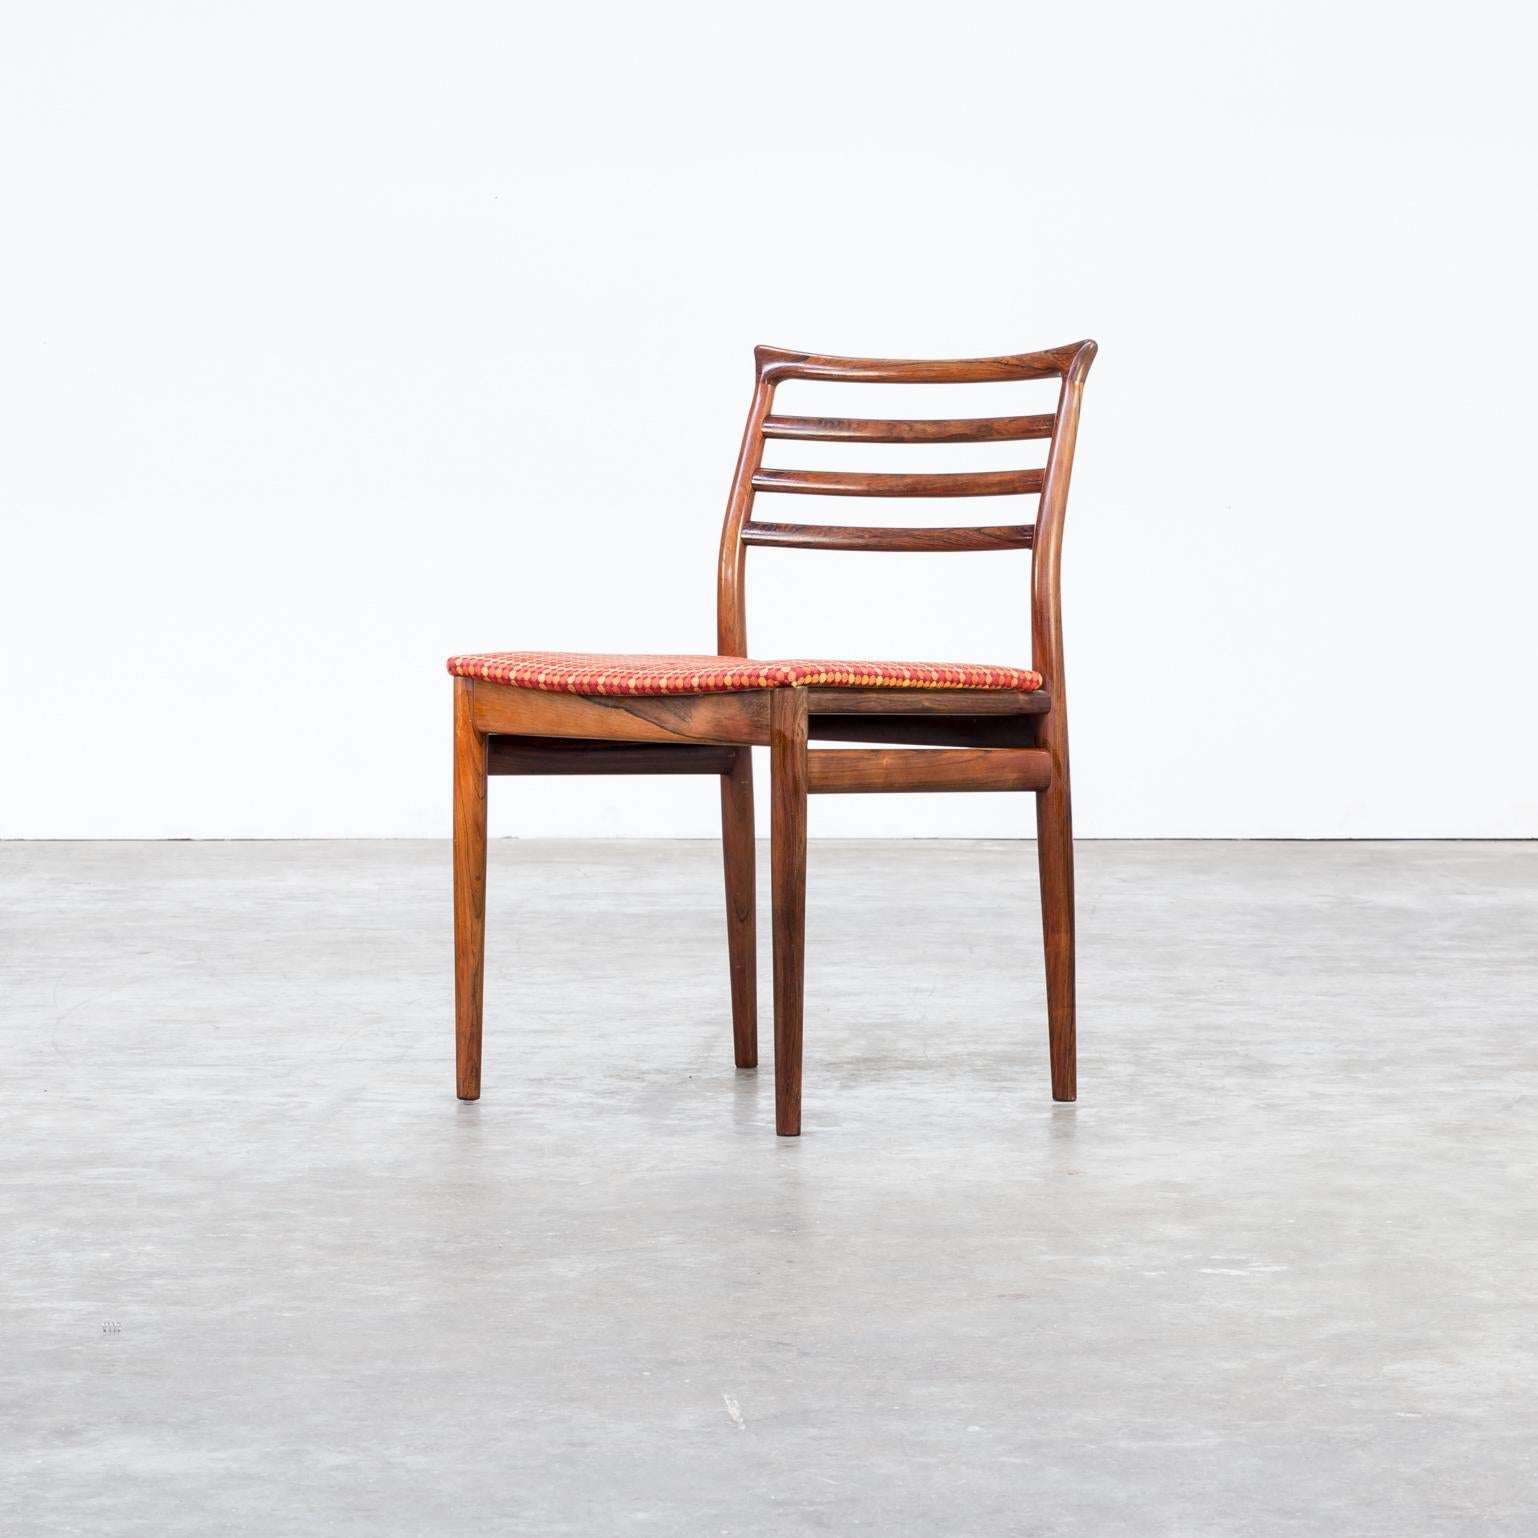 1960s Erling Torvits dining chair for Sorø Stolefabrik. Good condition, consistent with age and use.